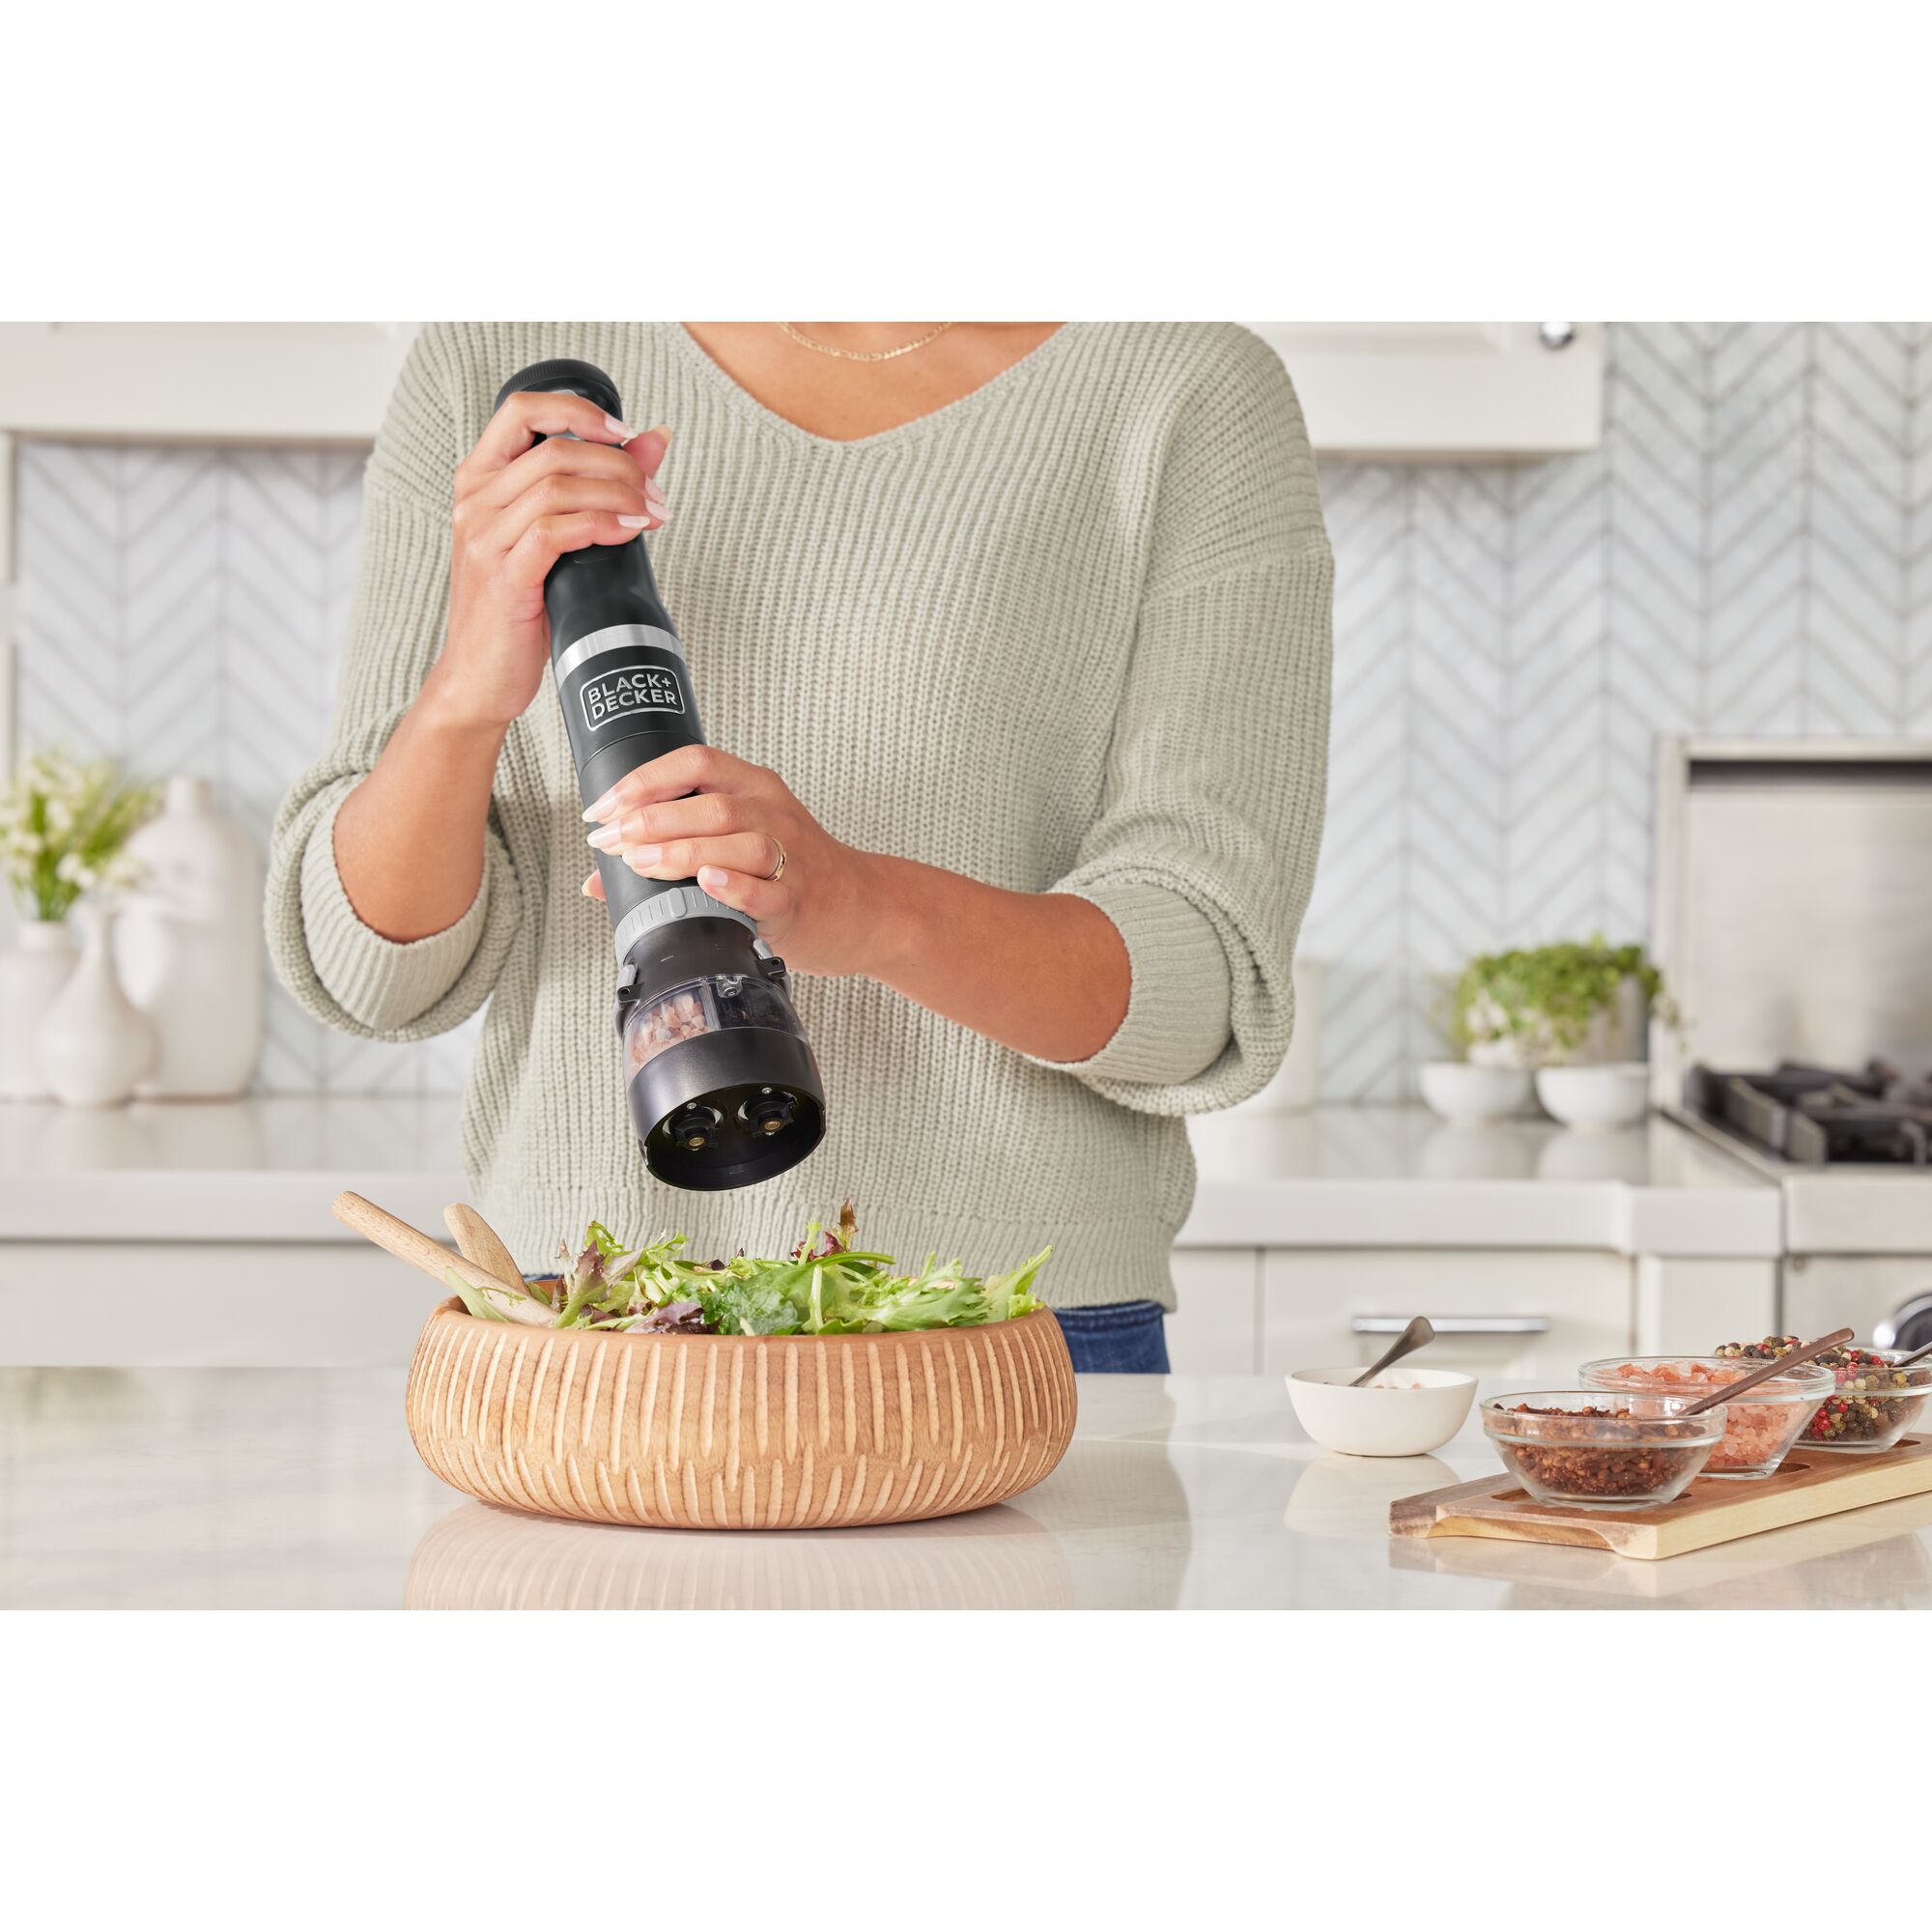 Talent using the black BLACK+DECKER kitchen wand spice grinder attachment to add spices to a salad